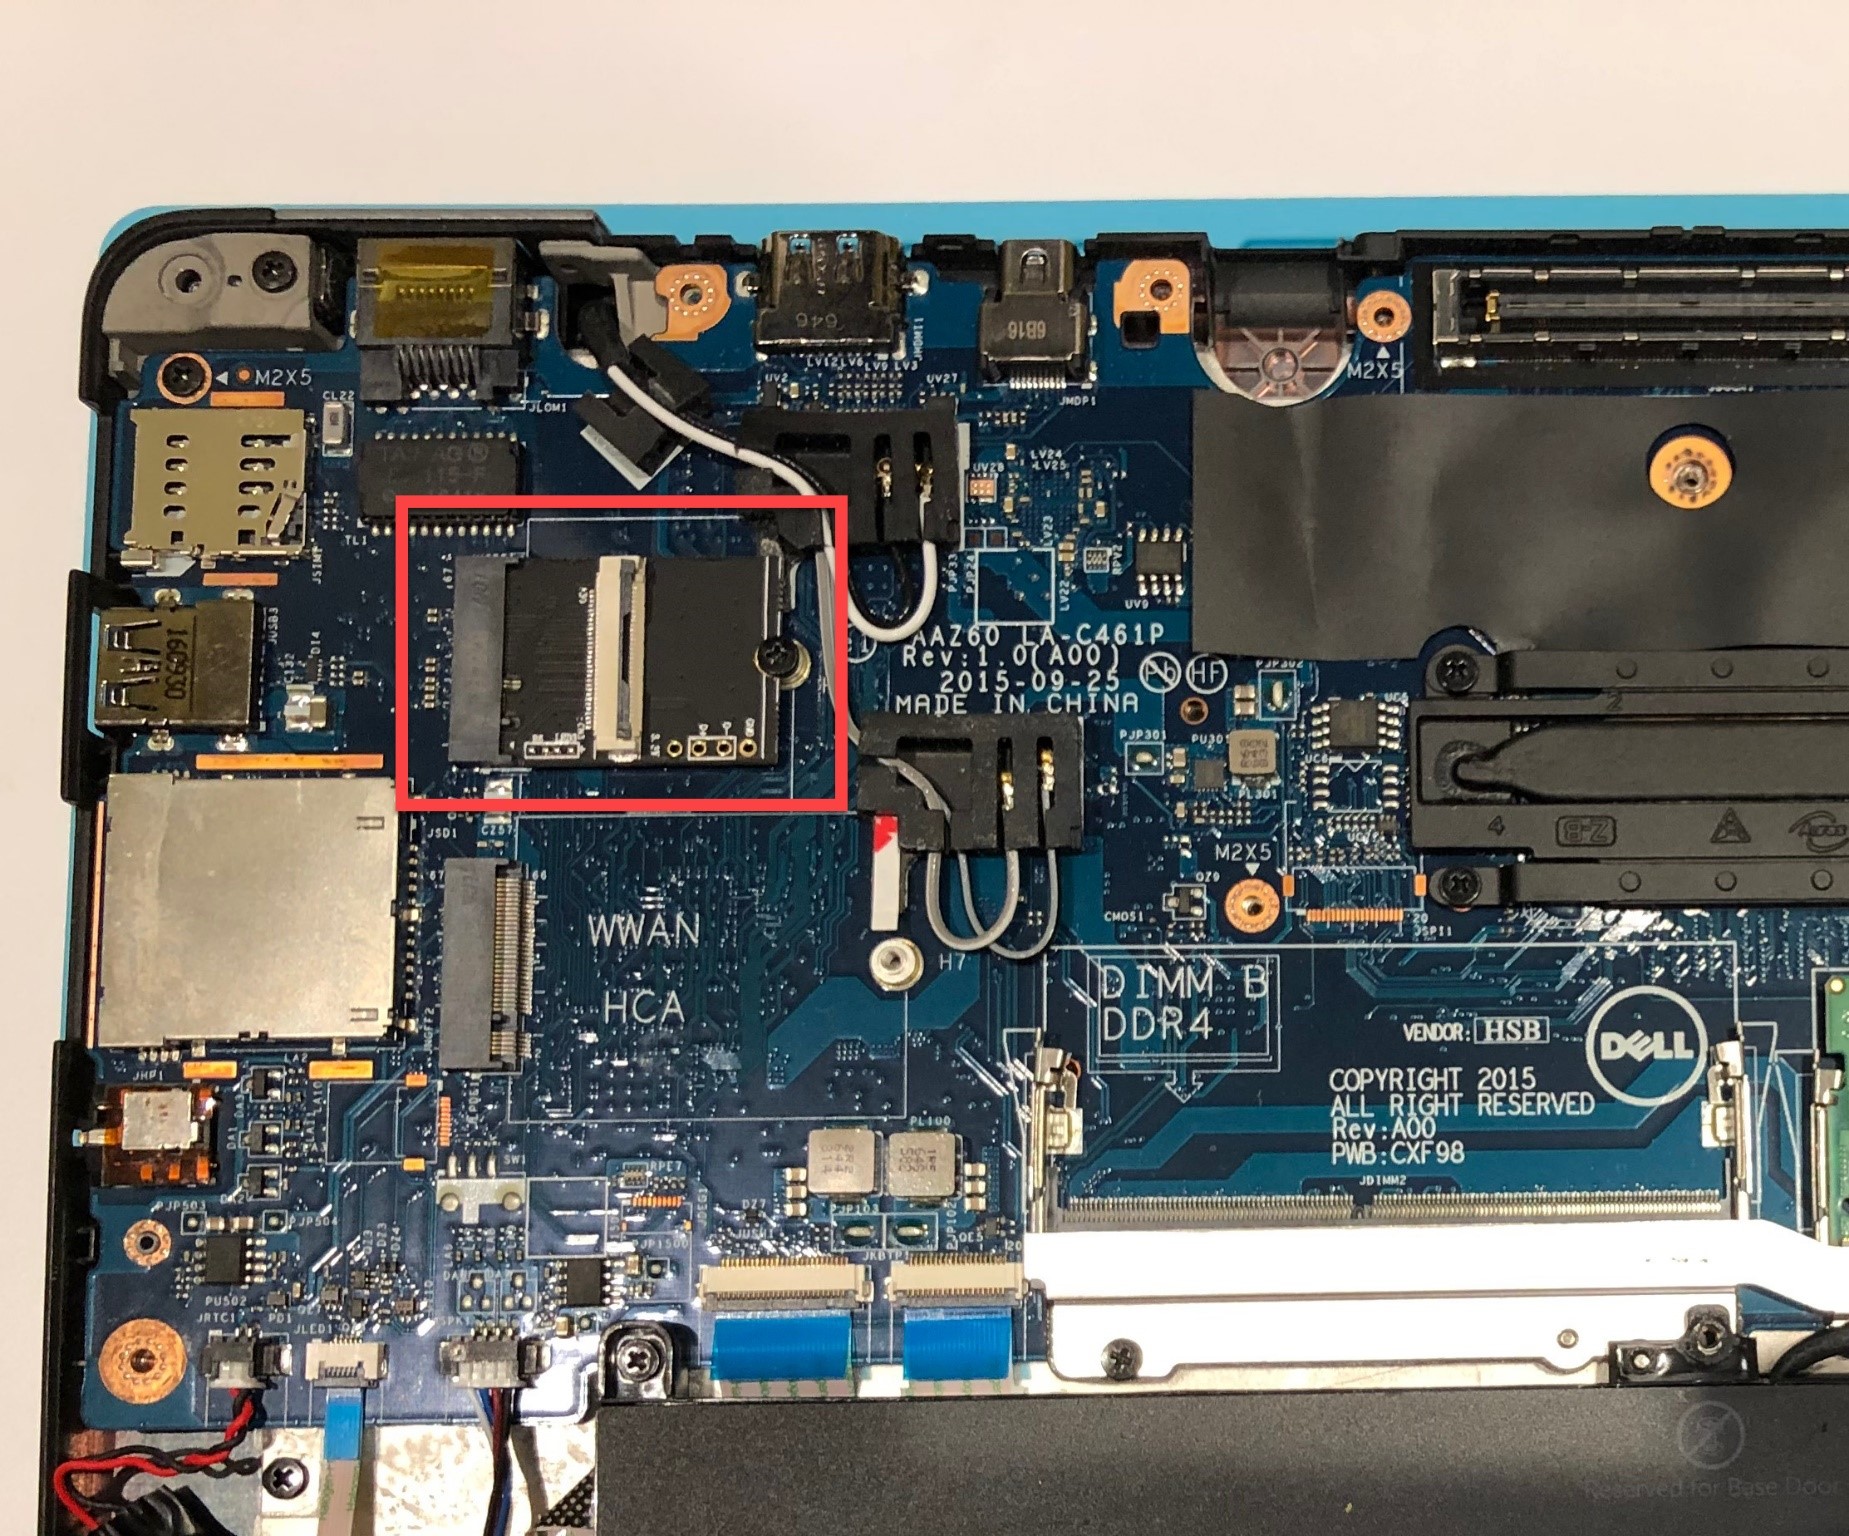 Replacing the wireless chip with our M.2 A/E adapter